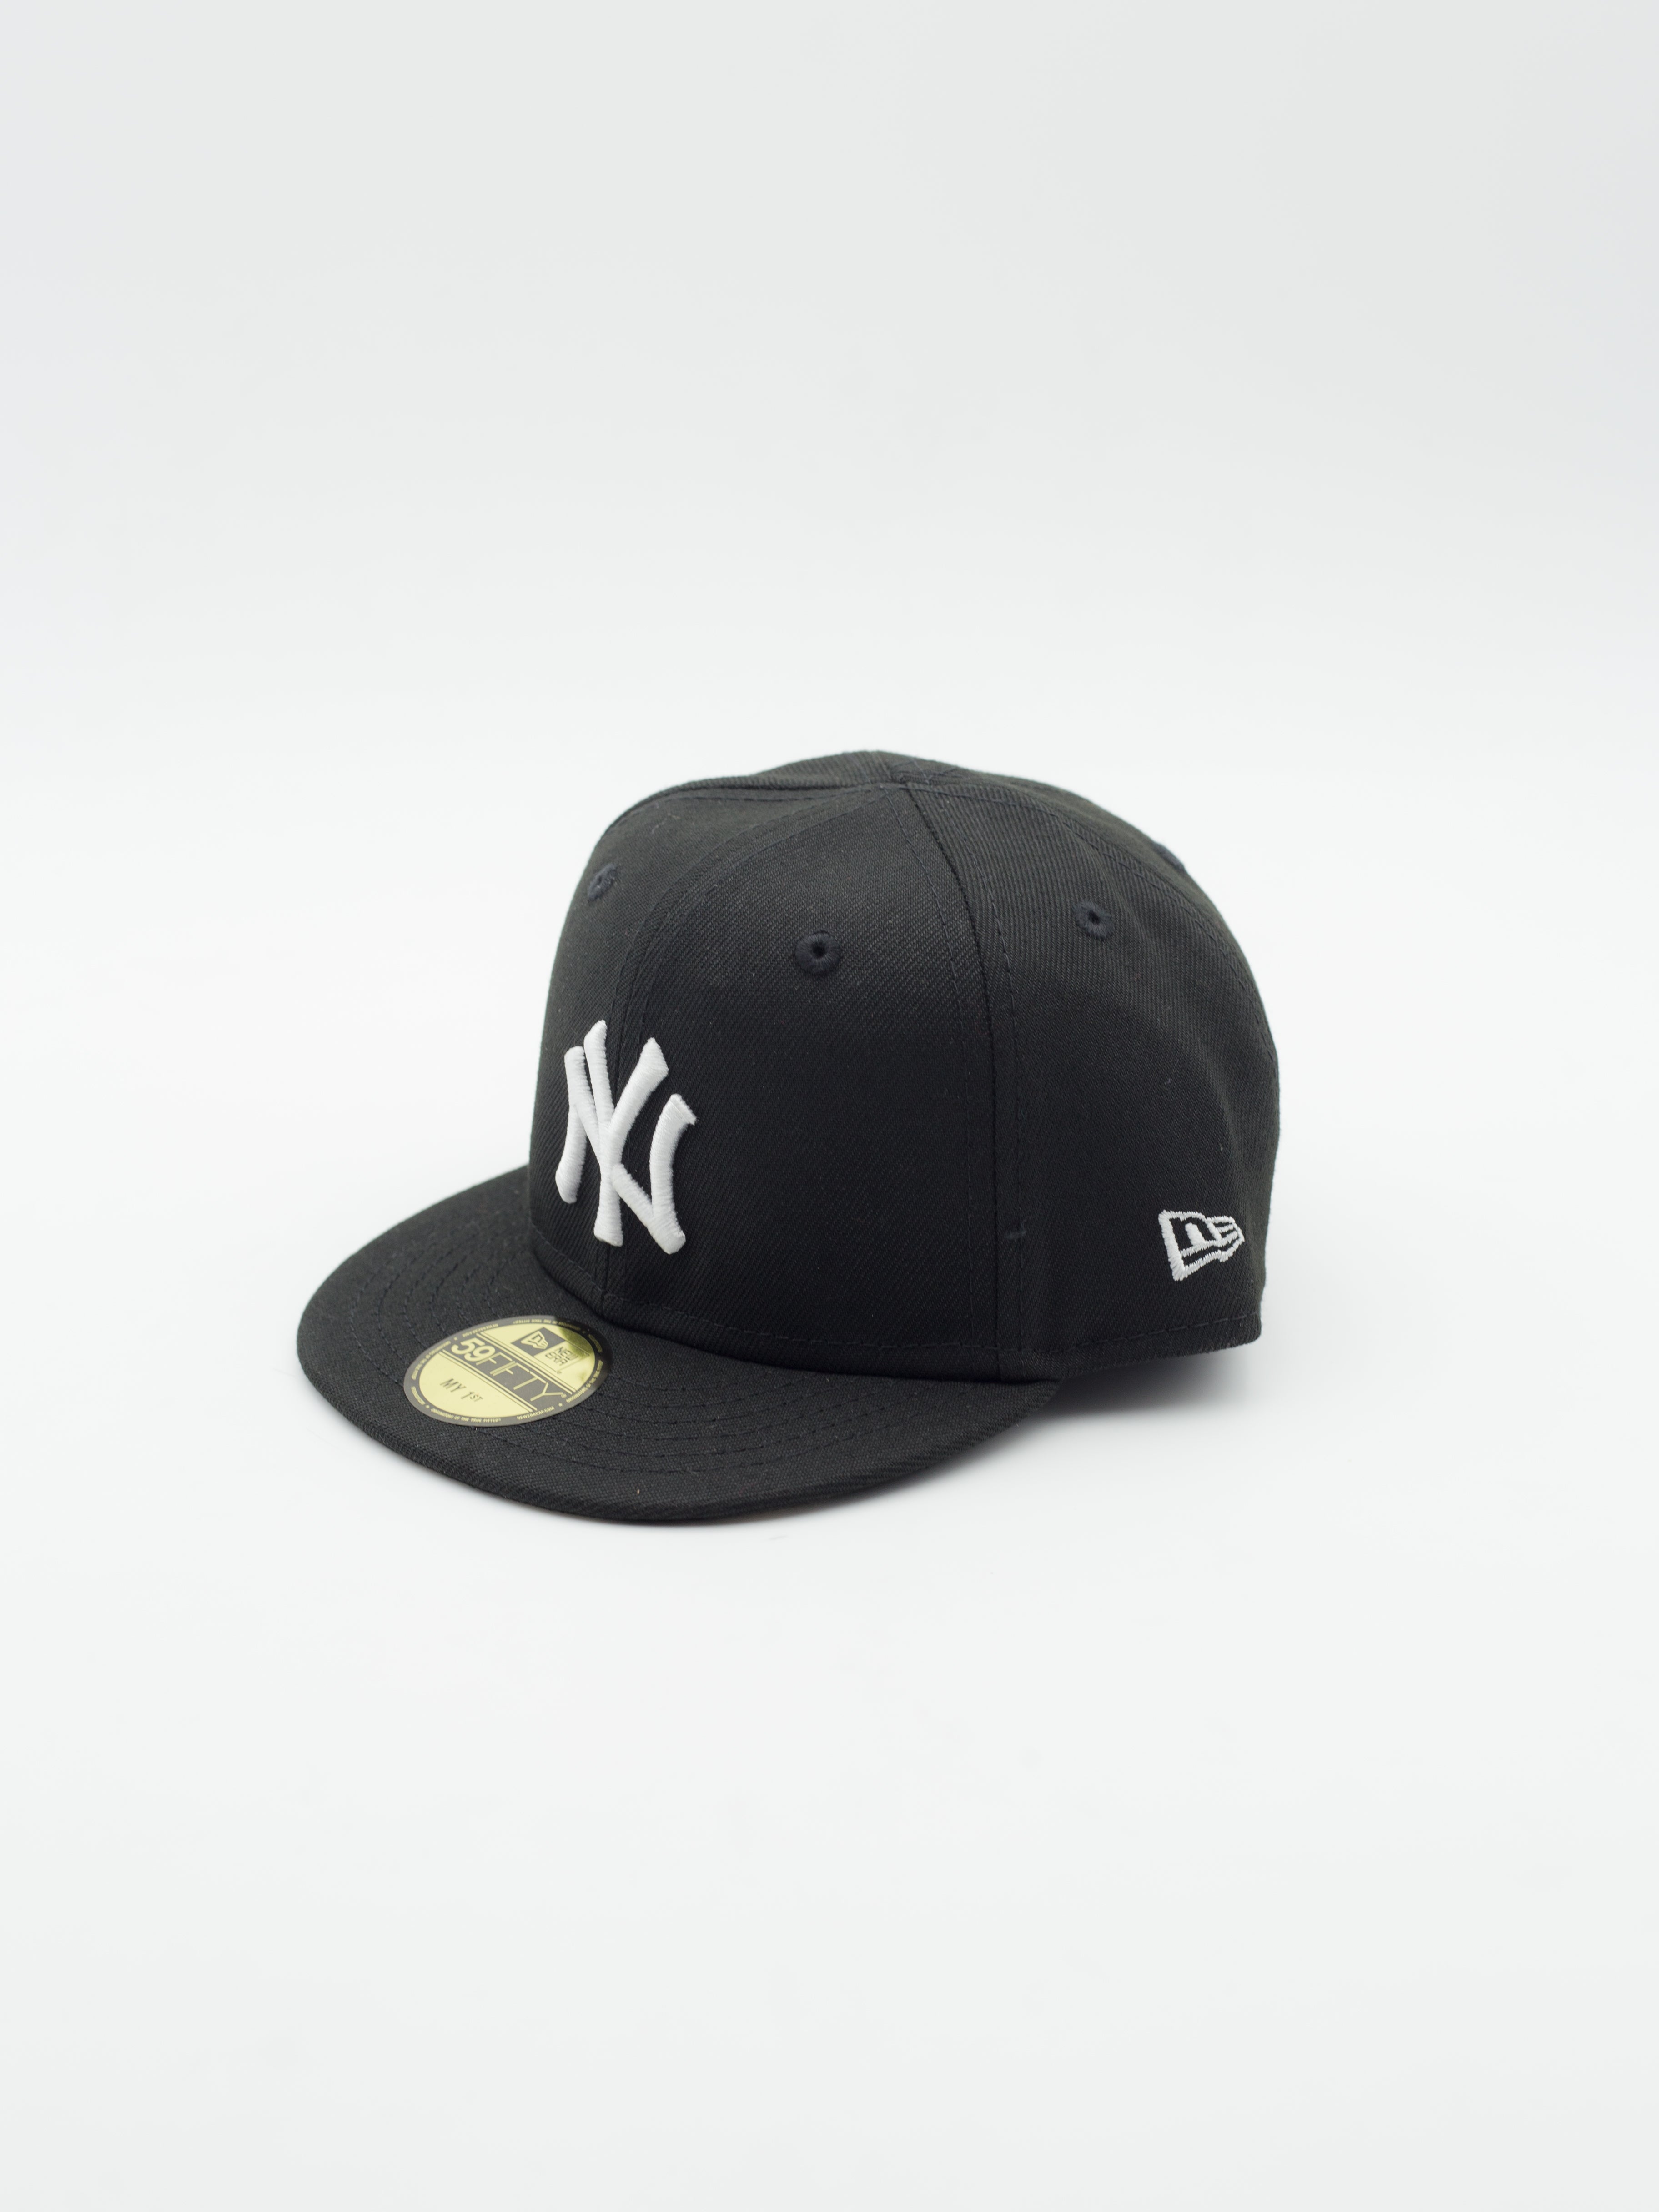 59Fifty "My First" New York Yankees Kids Black